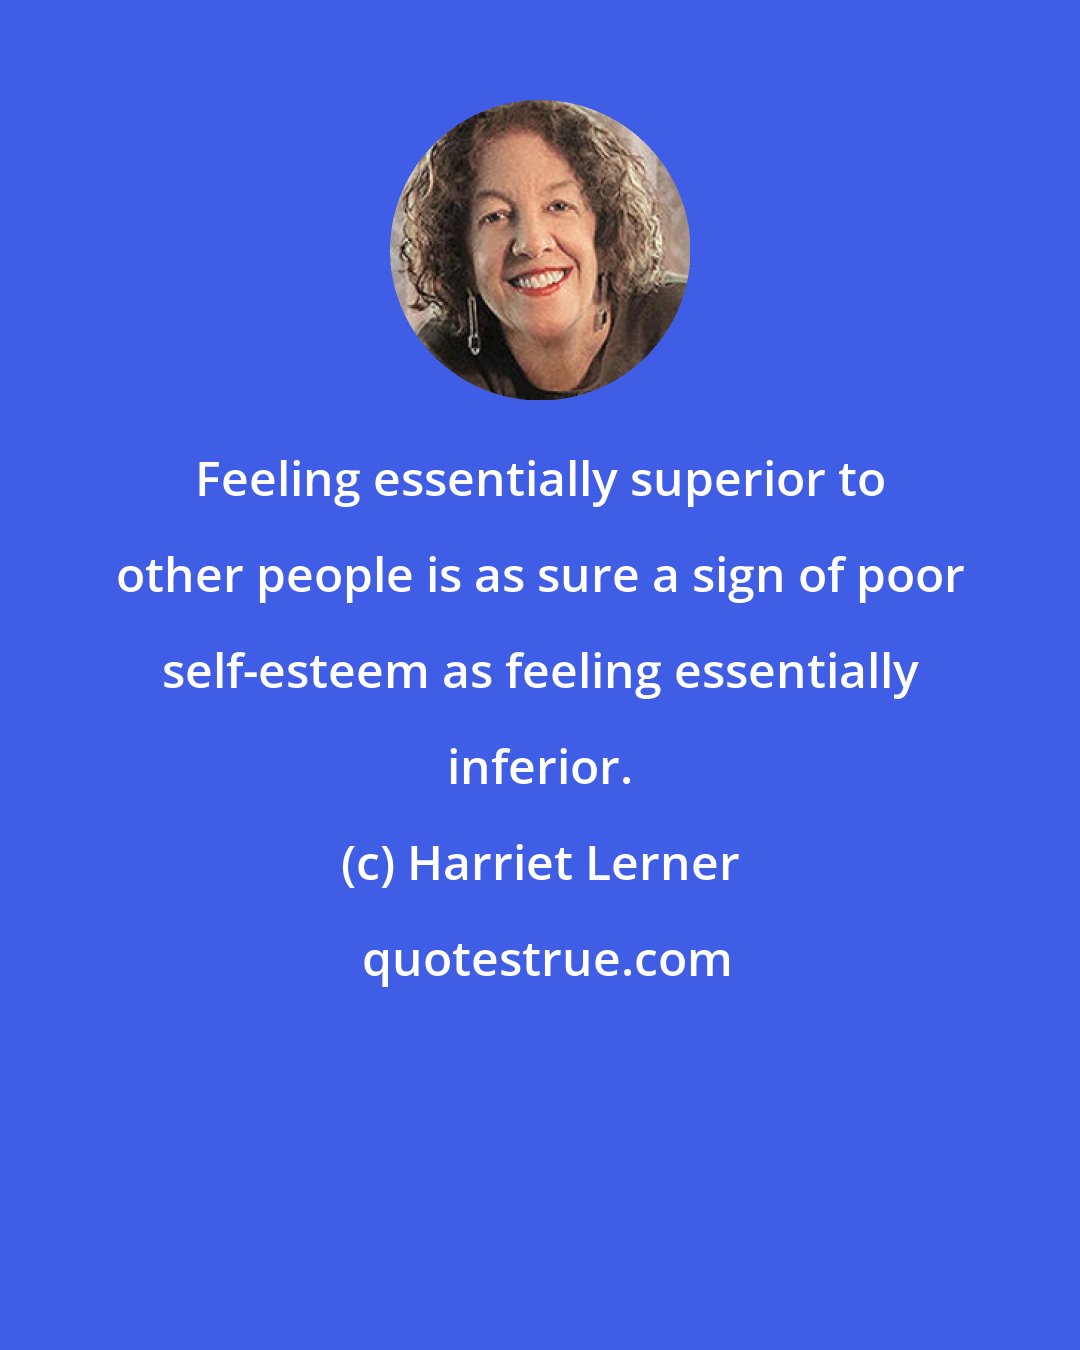 Harriet Lerner: Feeling essentially superior to other people is as sure a sign of poor self-esteem as feeling essentially inferior.